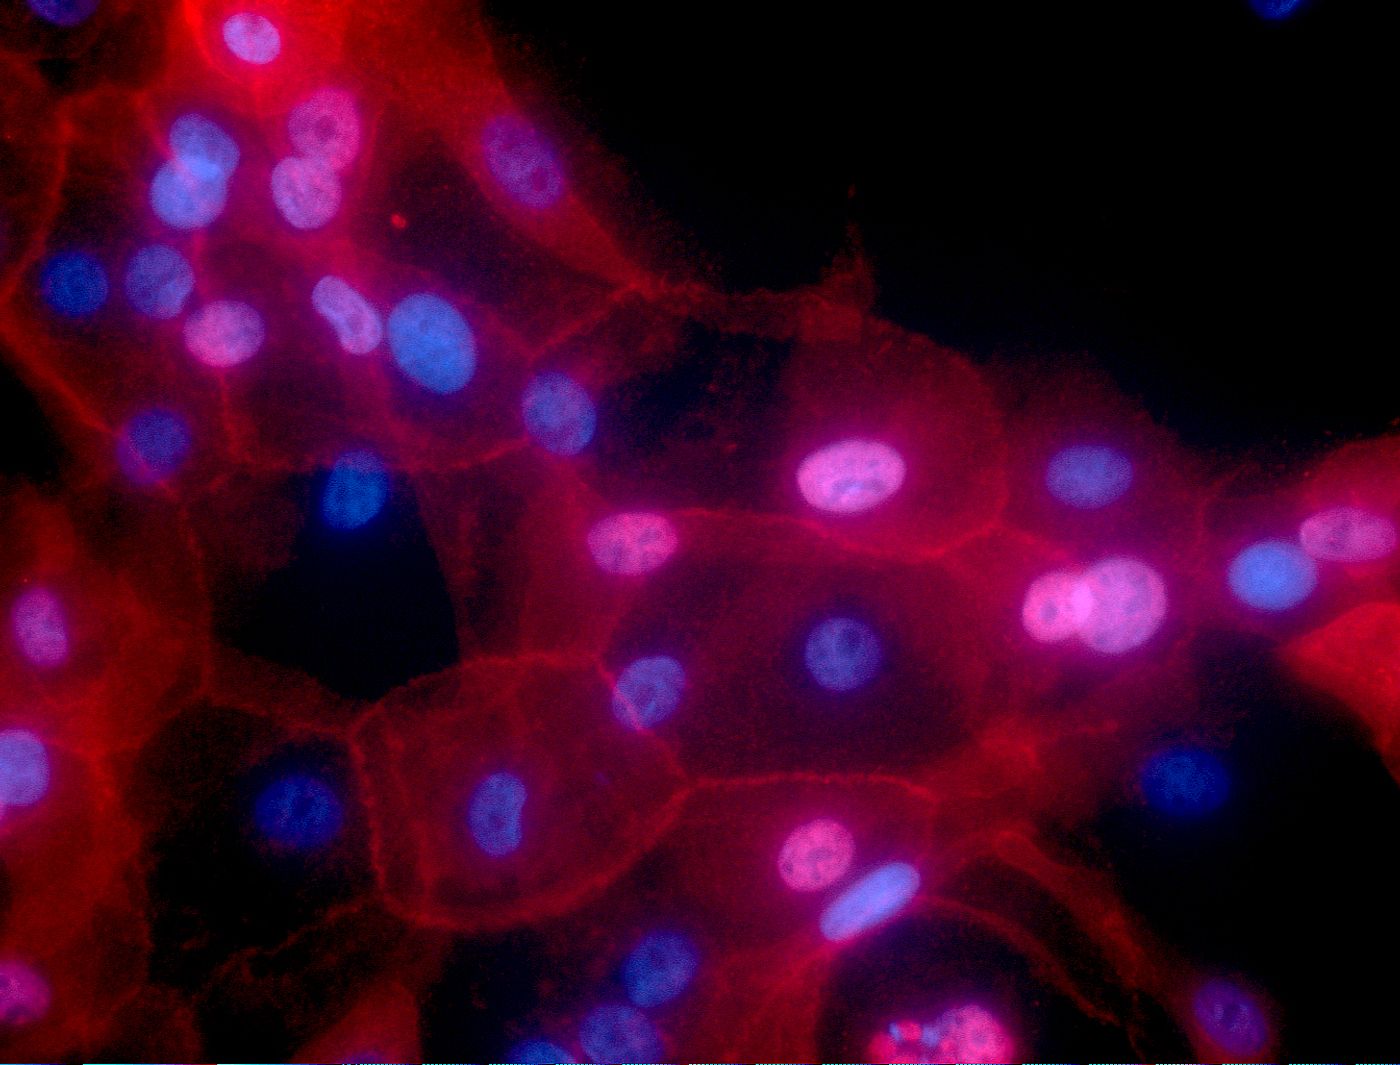 Image of human breast cancer conditionally reprogrammed cells in culture. Fluorescence red color represents MHC-I, and nuclei are shown in blue. / Credit: National Cancer Institute / Georgetown Lombardi Comprehensive Cancer Center / Ewa Krawczyk